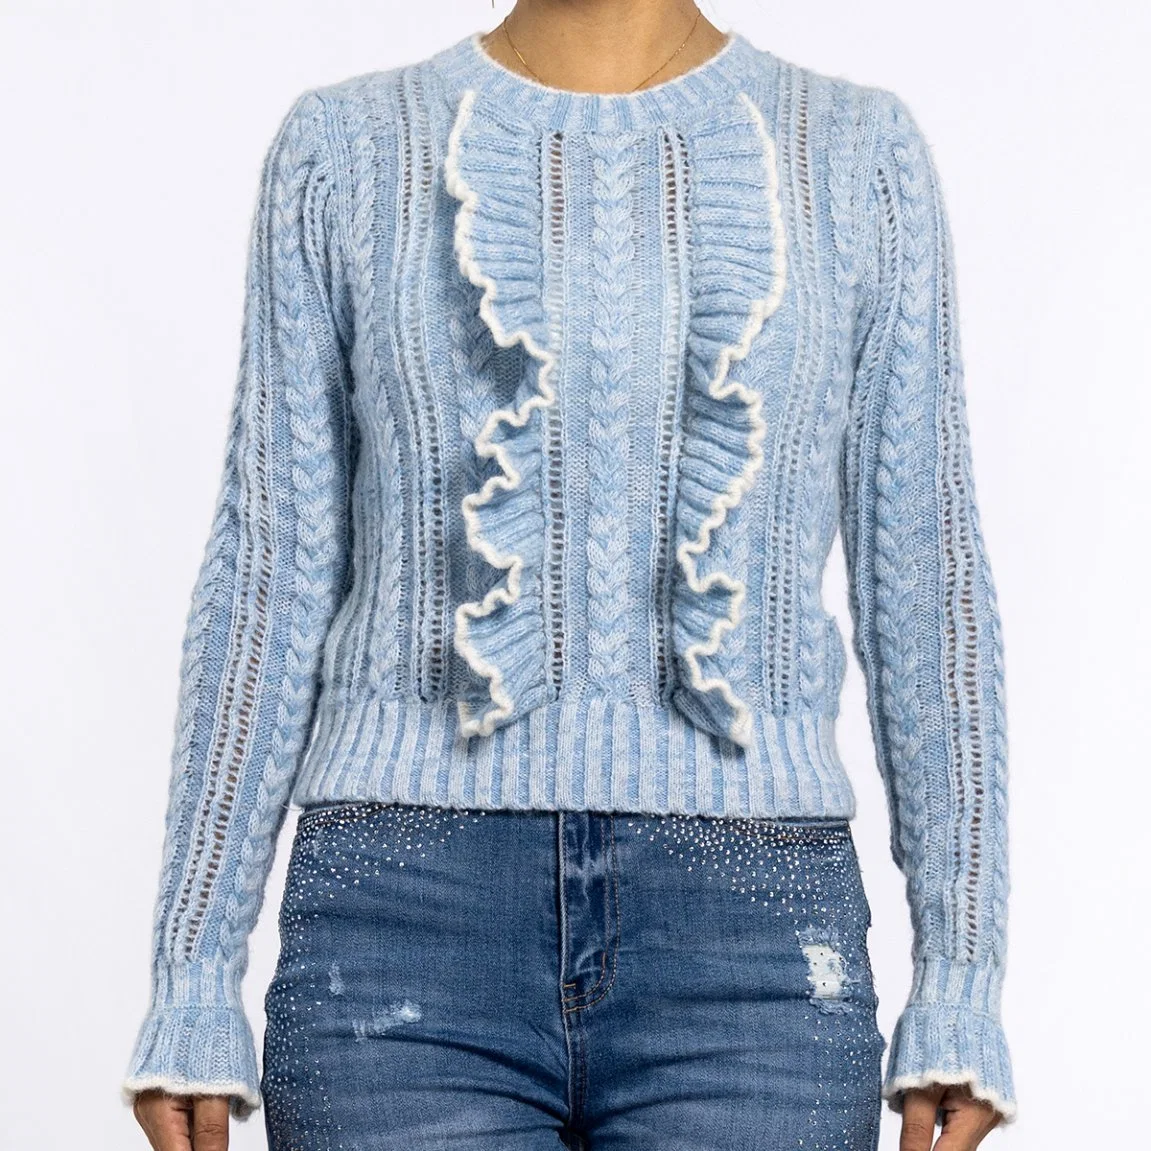 Fashion Autumn Blue Mullet Knit Top Womens pull-over pull-over pull-over